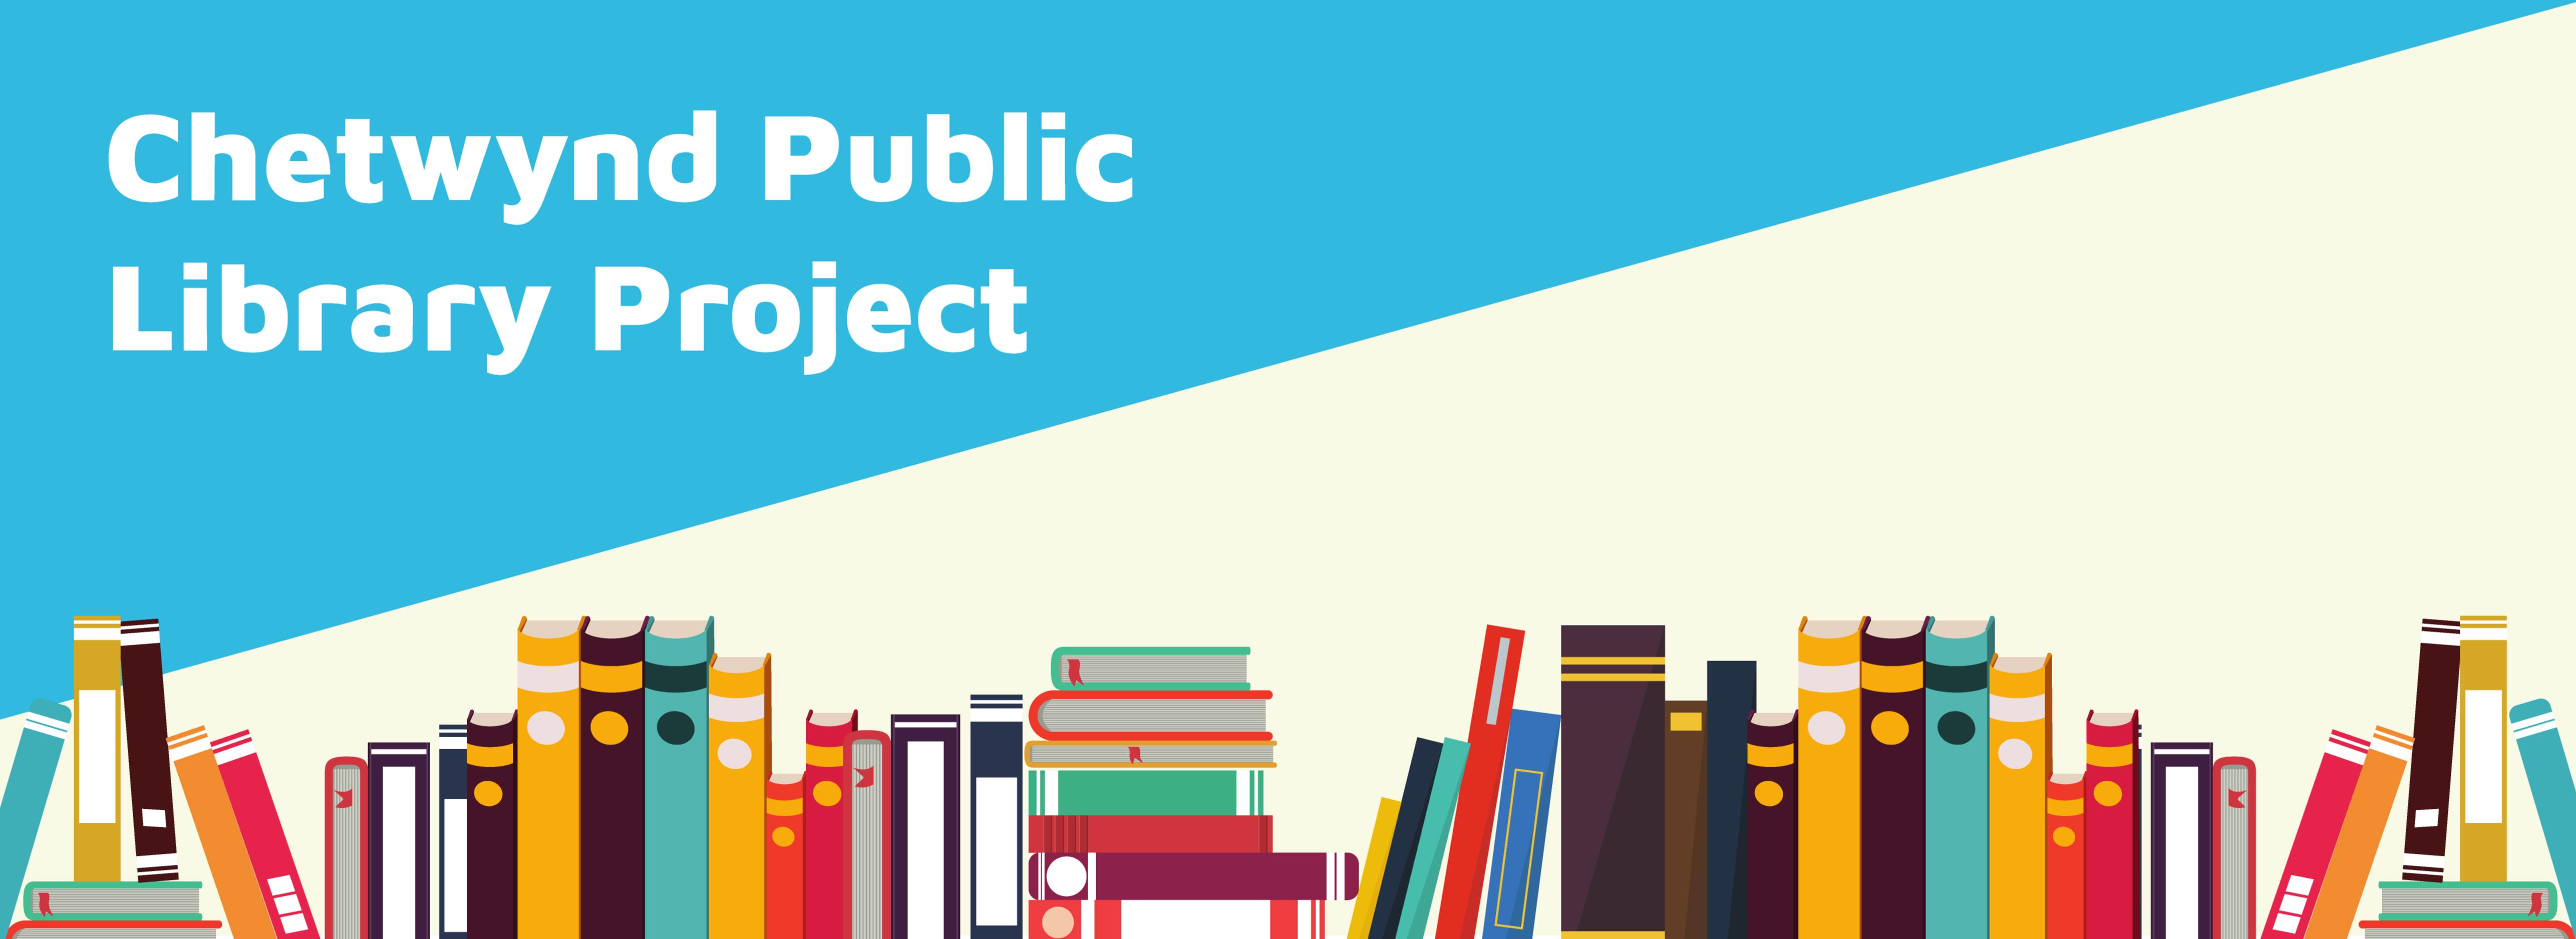 row of books along the bottom of a banner with "chetwynd public library project" overtop.